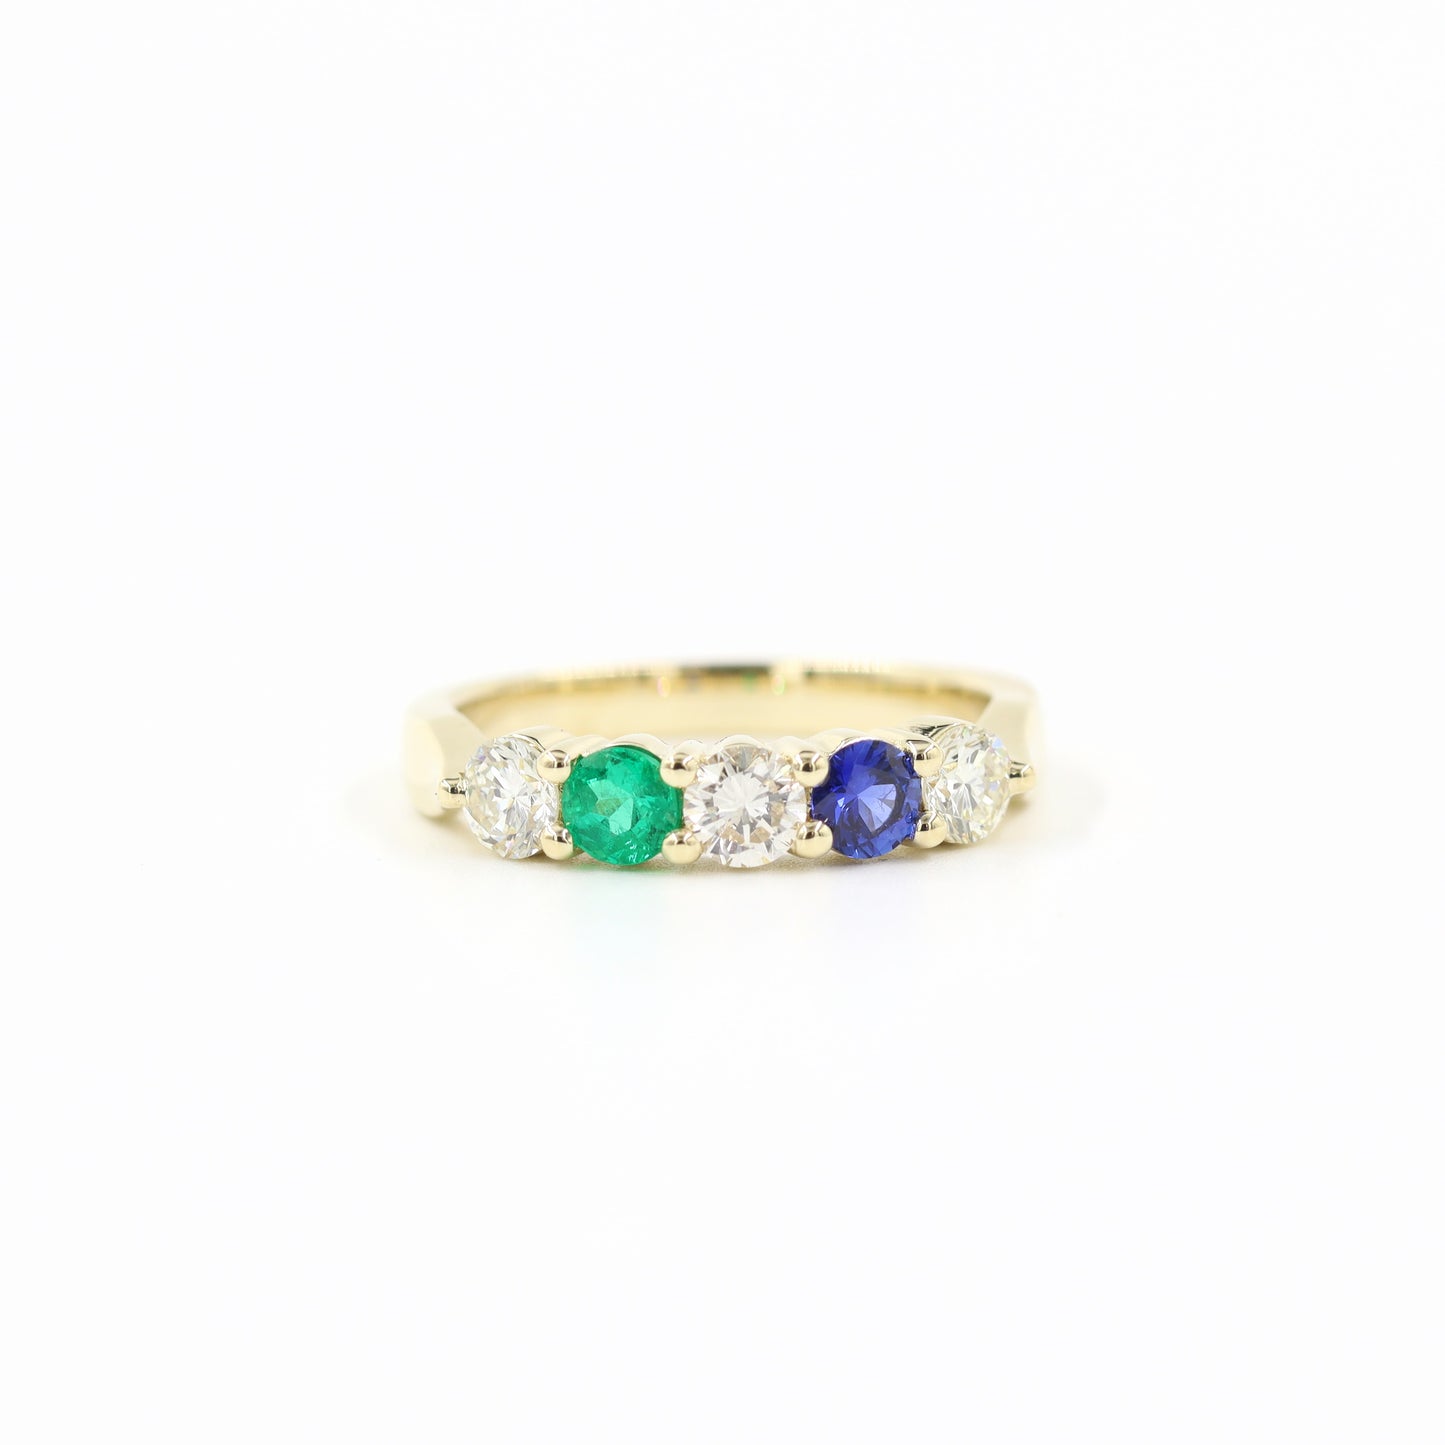 Emerald and Sapphire Diamond Ring/Dainty Emerald Ring / Natural Emerald Sapphire / Emerald and Diamond Ring / Statement Ring /Gift for her